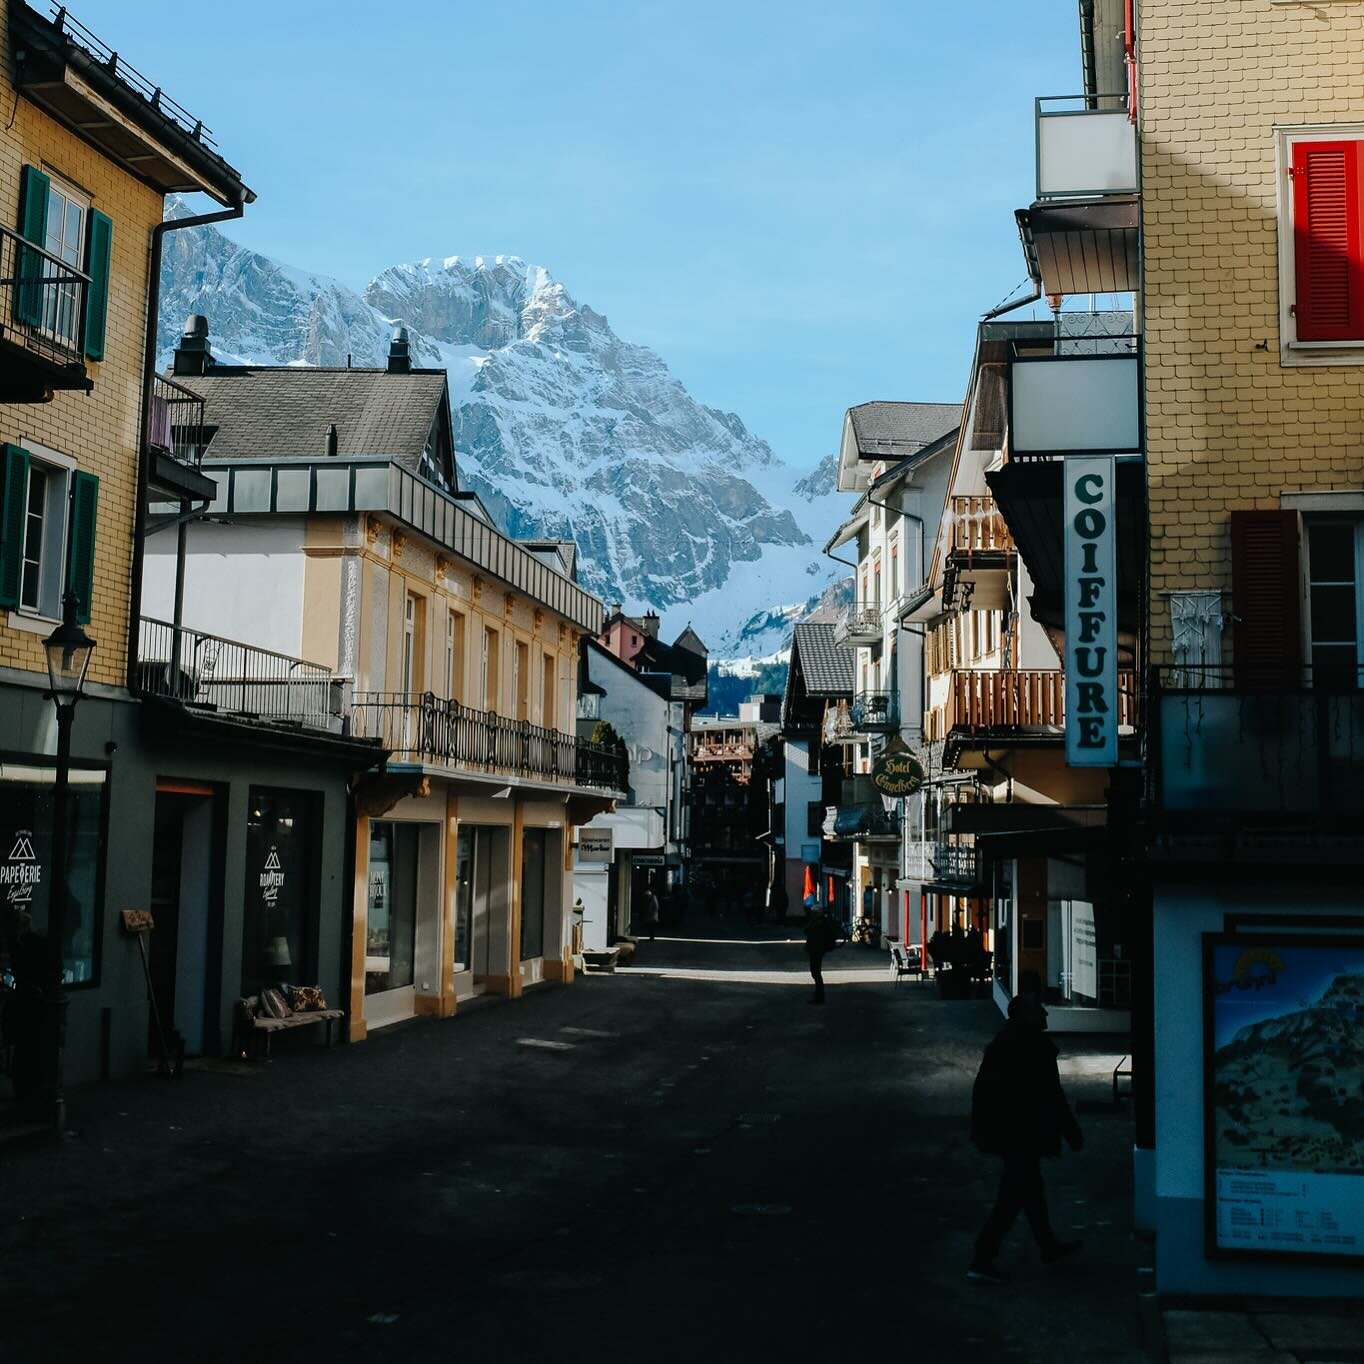 Some more Swiss 1/3🇨🇭

Lunch hour on a Sunday in the small village of Engelberg during a minimal snow year brings semi empty streets. When we were in Switzerland we took a day trip from Zurich by train to Lucerne (Luzern) then to Engelberg. It was 